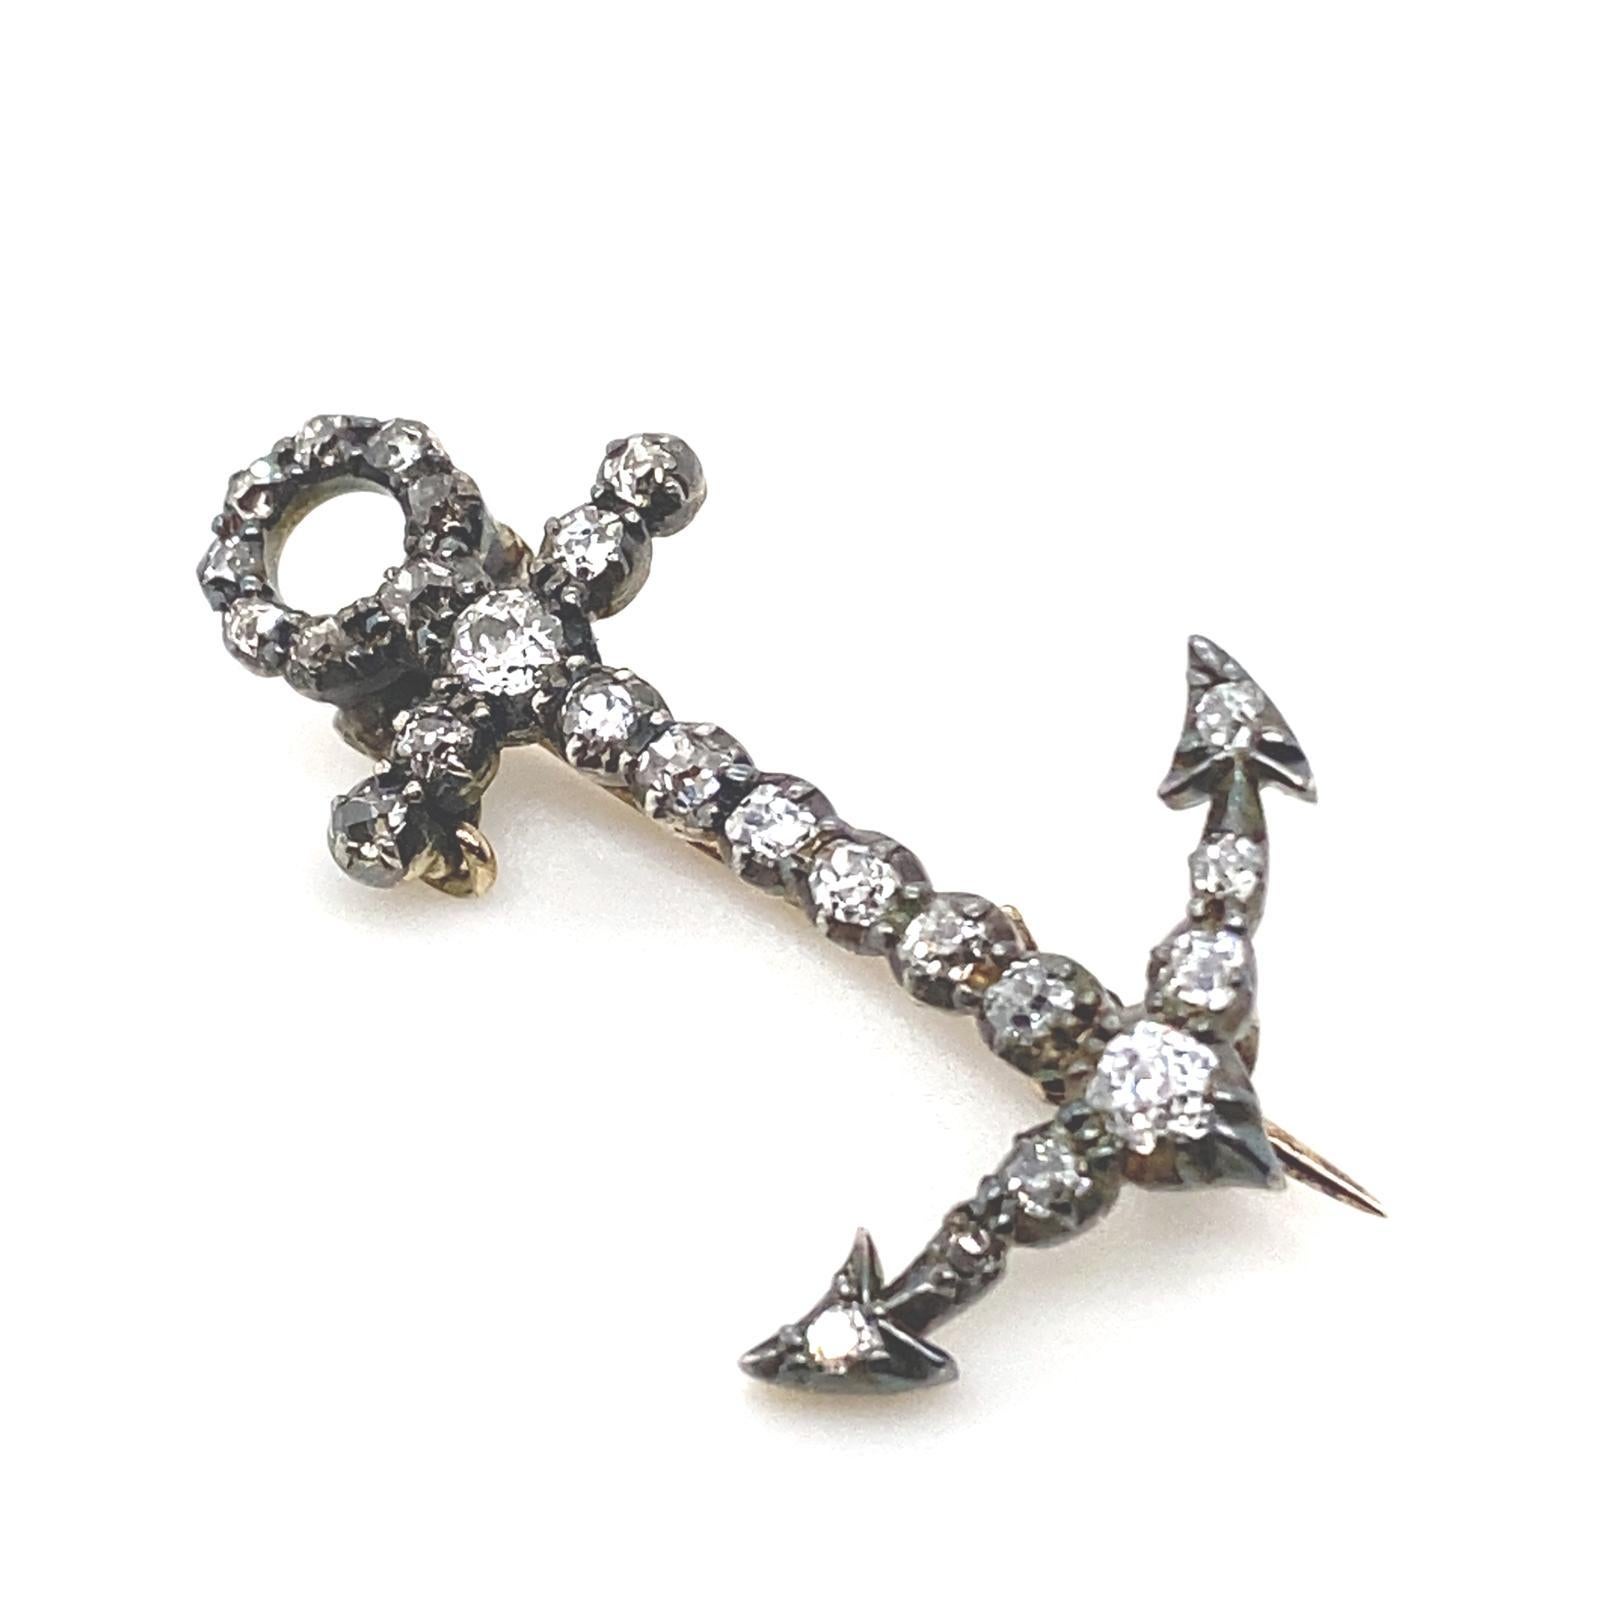 A Victorian diamond set anchor brooch in silver and yellow gold.

This late 19th Century brooch, takes the form of an anchor, set throughout with old mine cut diamonds for a total of 0.50 carats approximately, assessed as H-L colour, VS2 clarity all